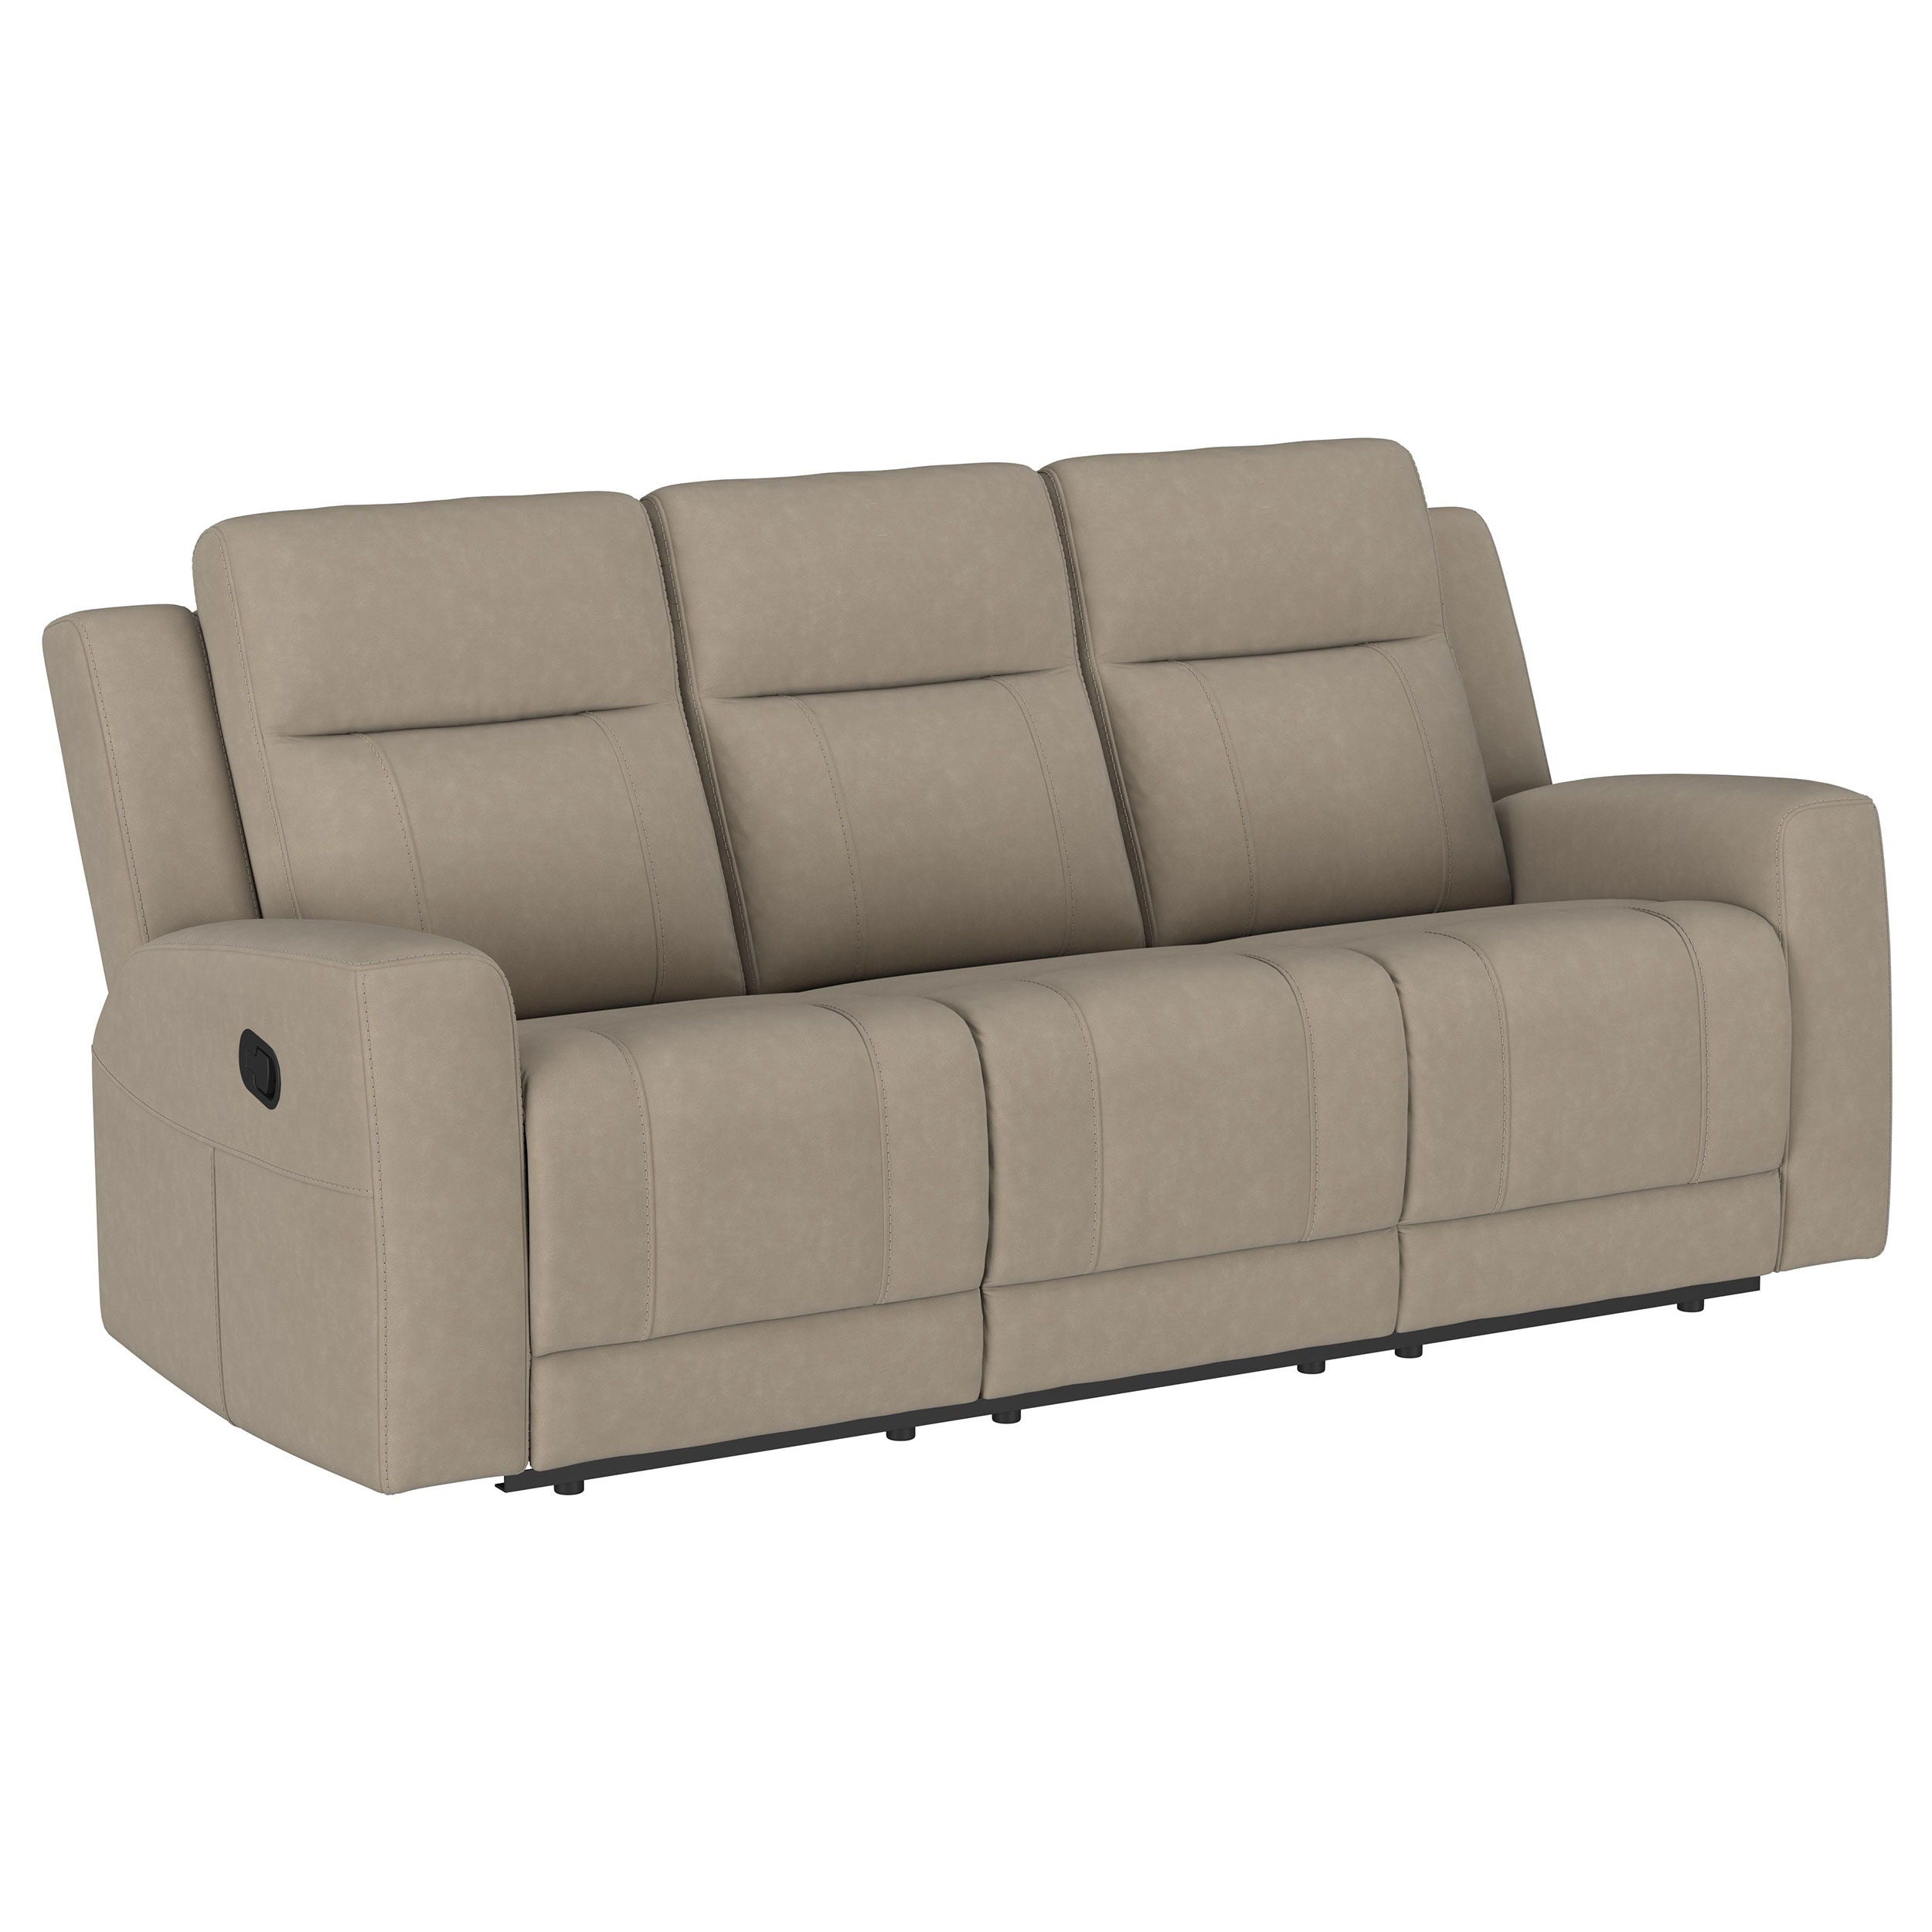 Coaster Fine Furniture - Brentwood - Upholstered Motion Reclining Sofa - Taupe - 5th Avenue Furniture